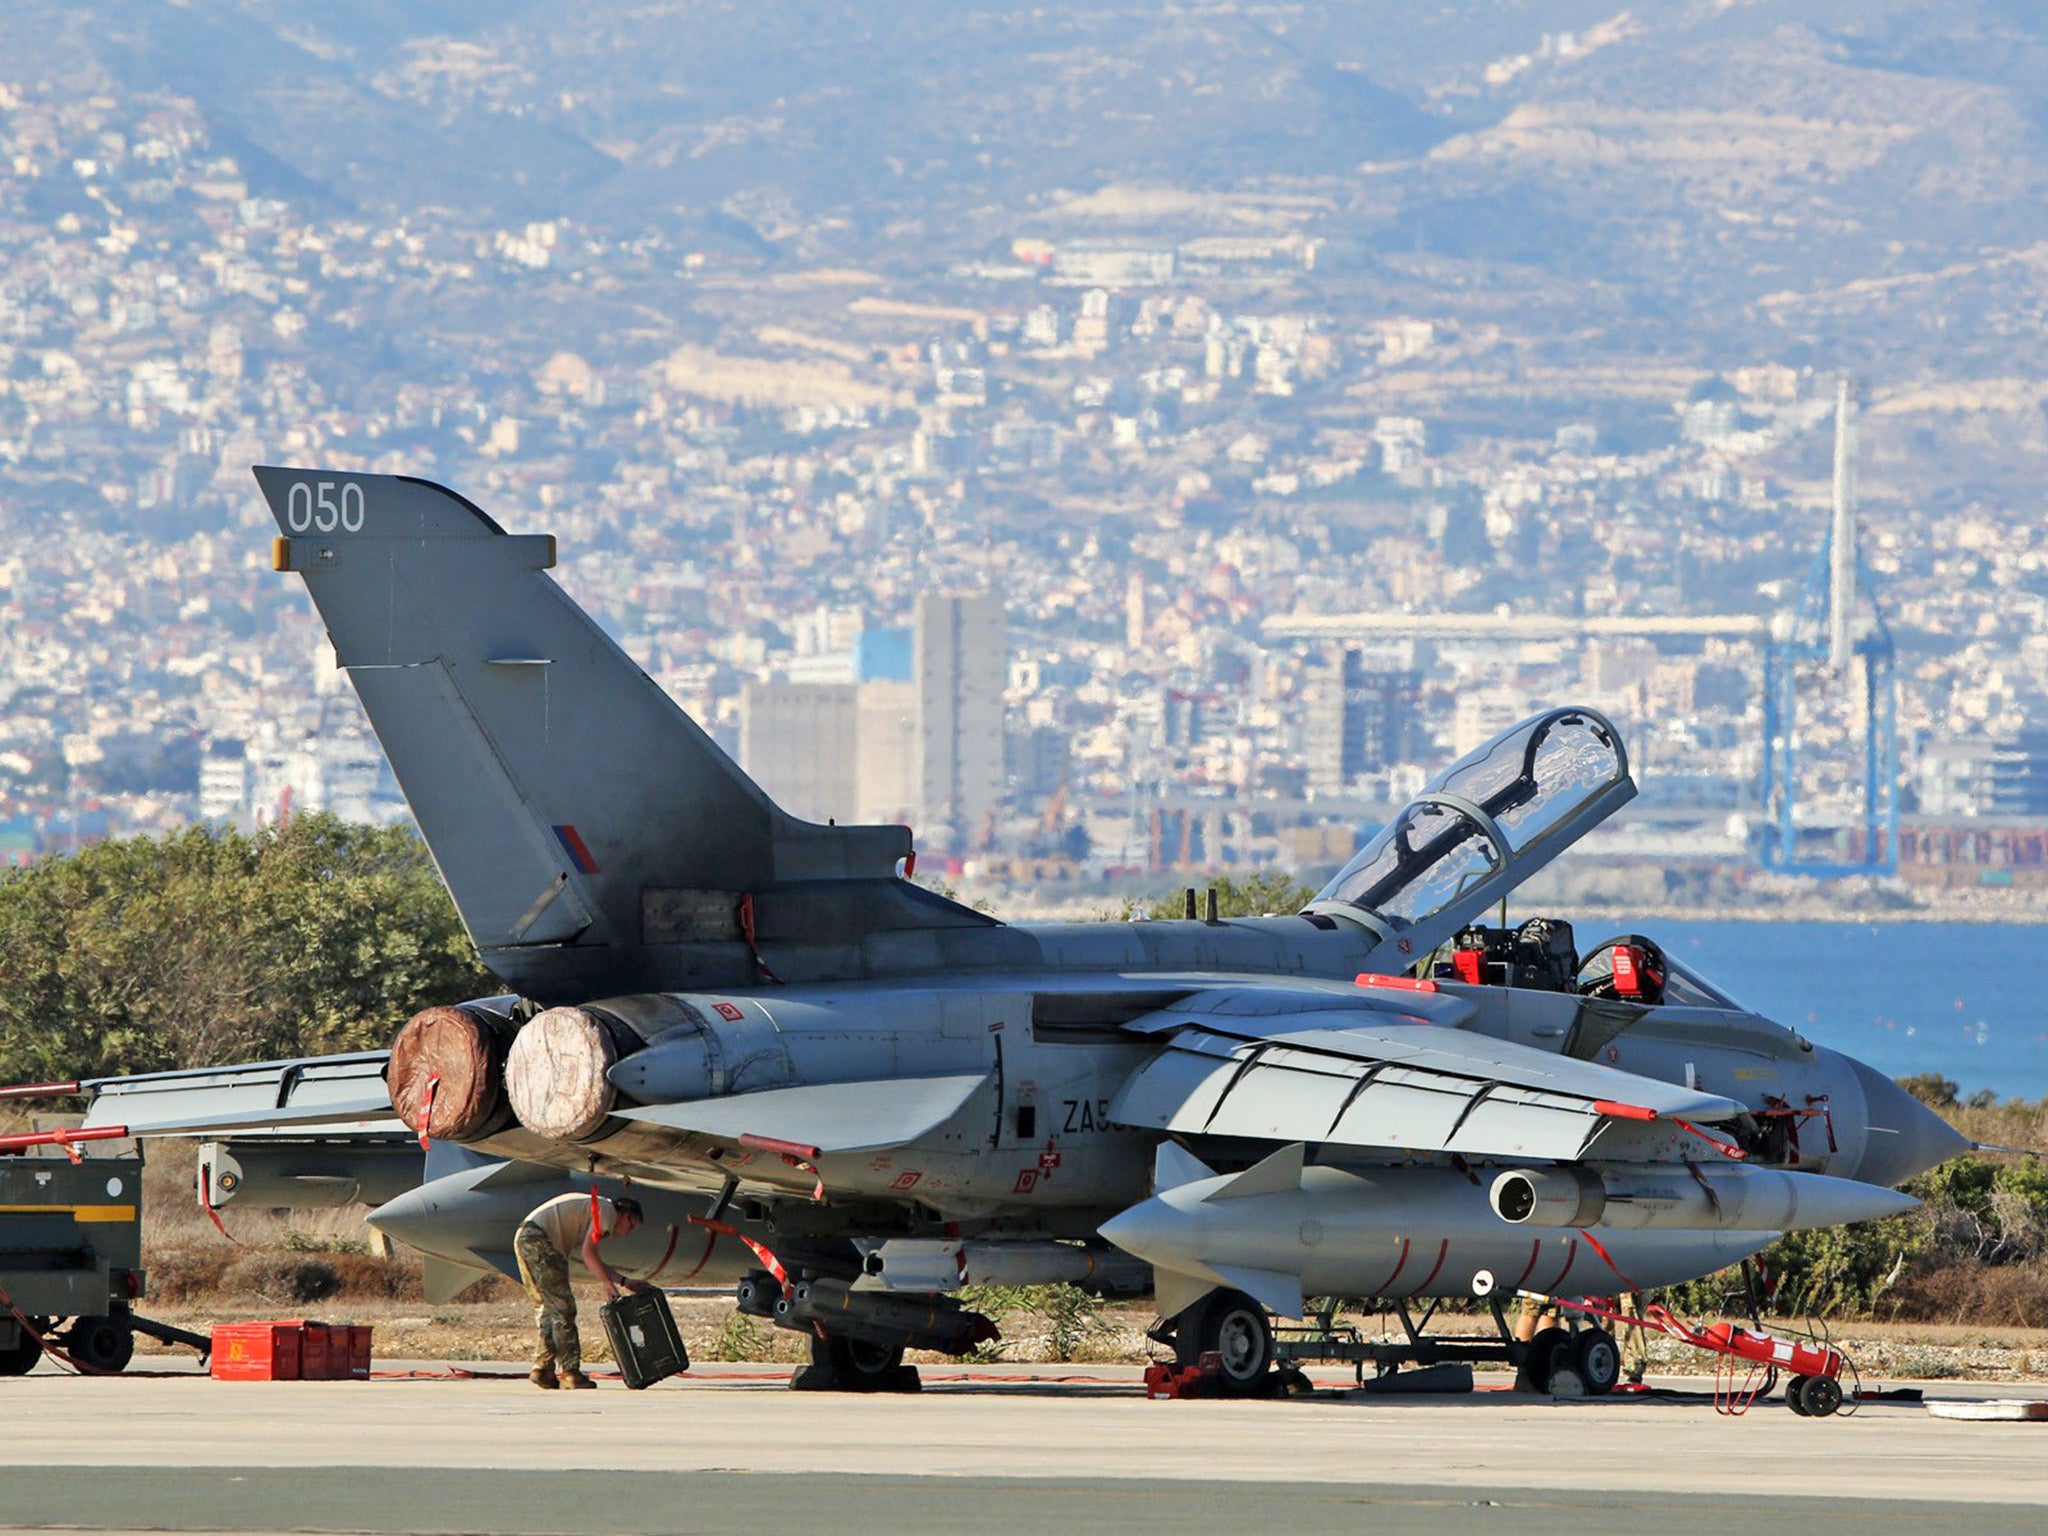 An RAF Tornado fighter jet at the Akrotiri airbase in Cyprus